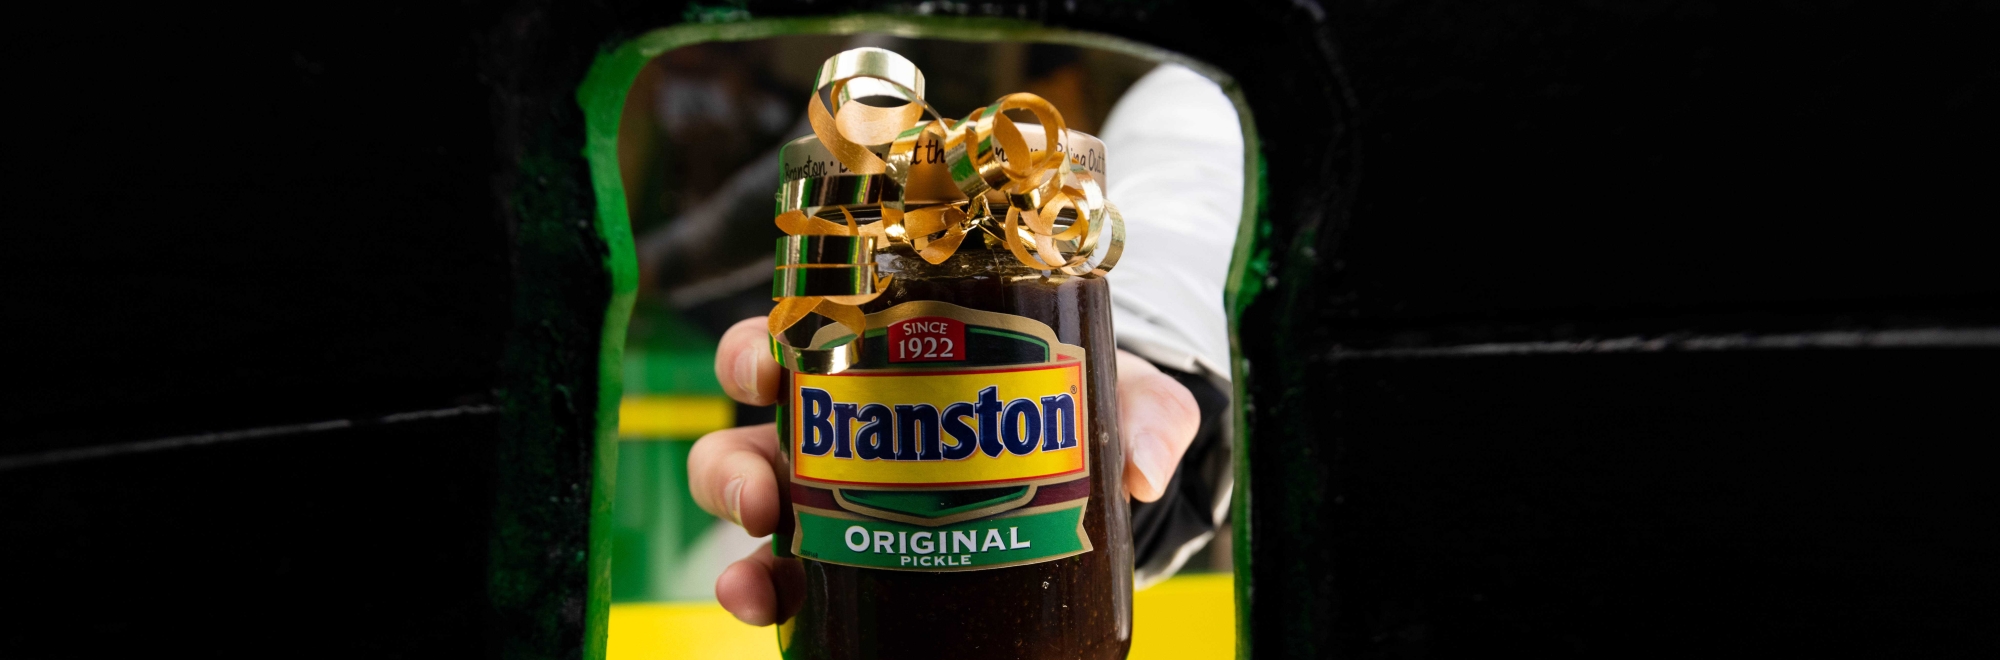 Branston Pickle delivers a ‘Hit of Home’ this Christmas with its very own International Pickle Post Office